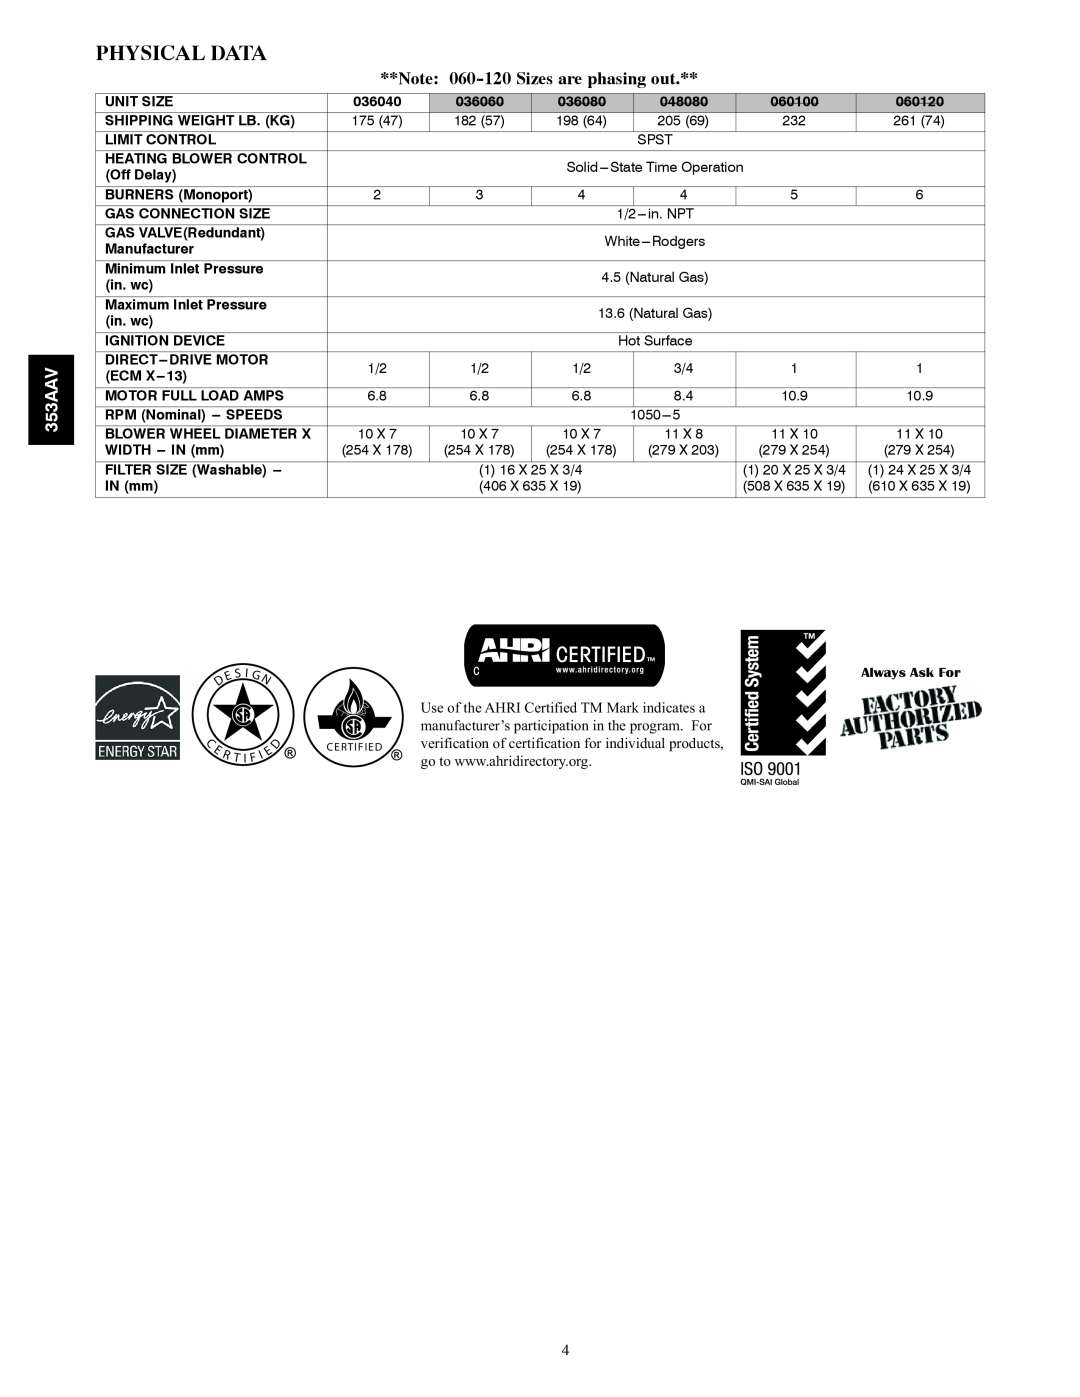 Bryant 353AAV manual Physical Data, 060-120Sizes are phasing out 